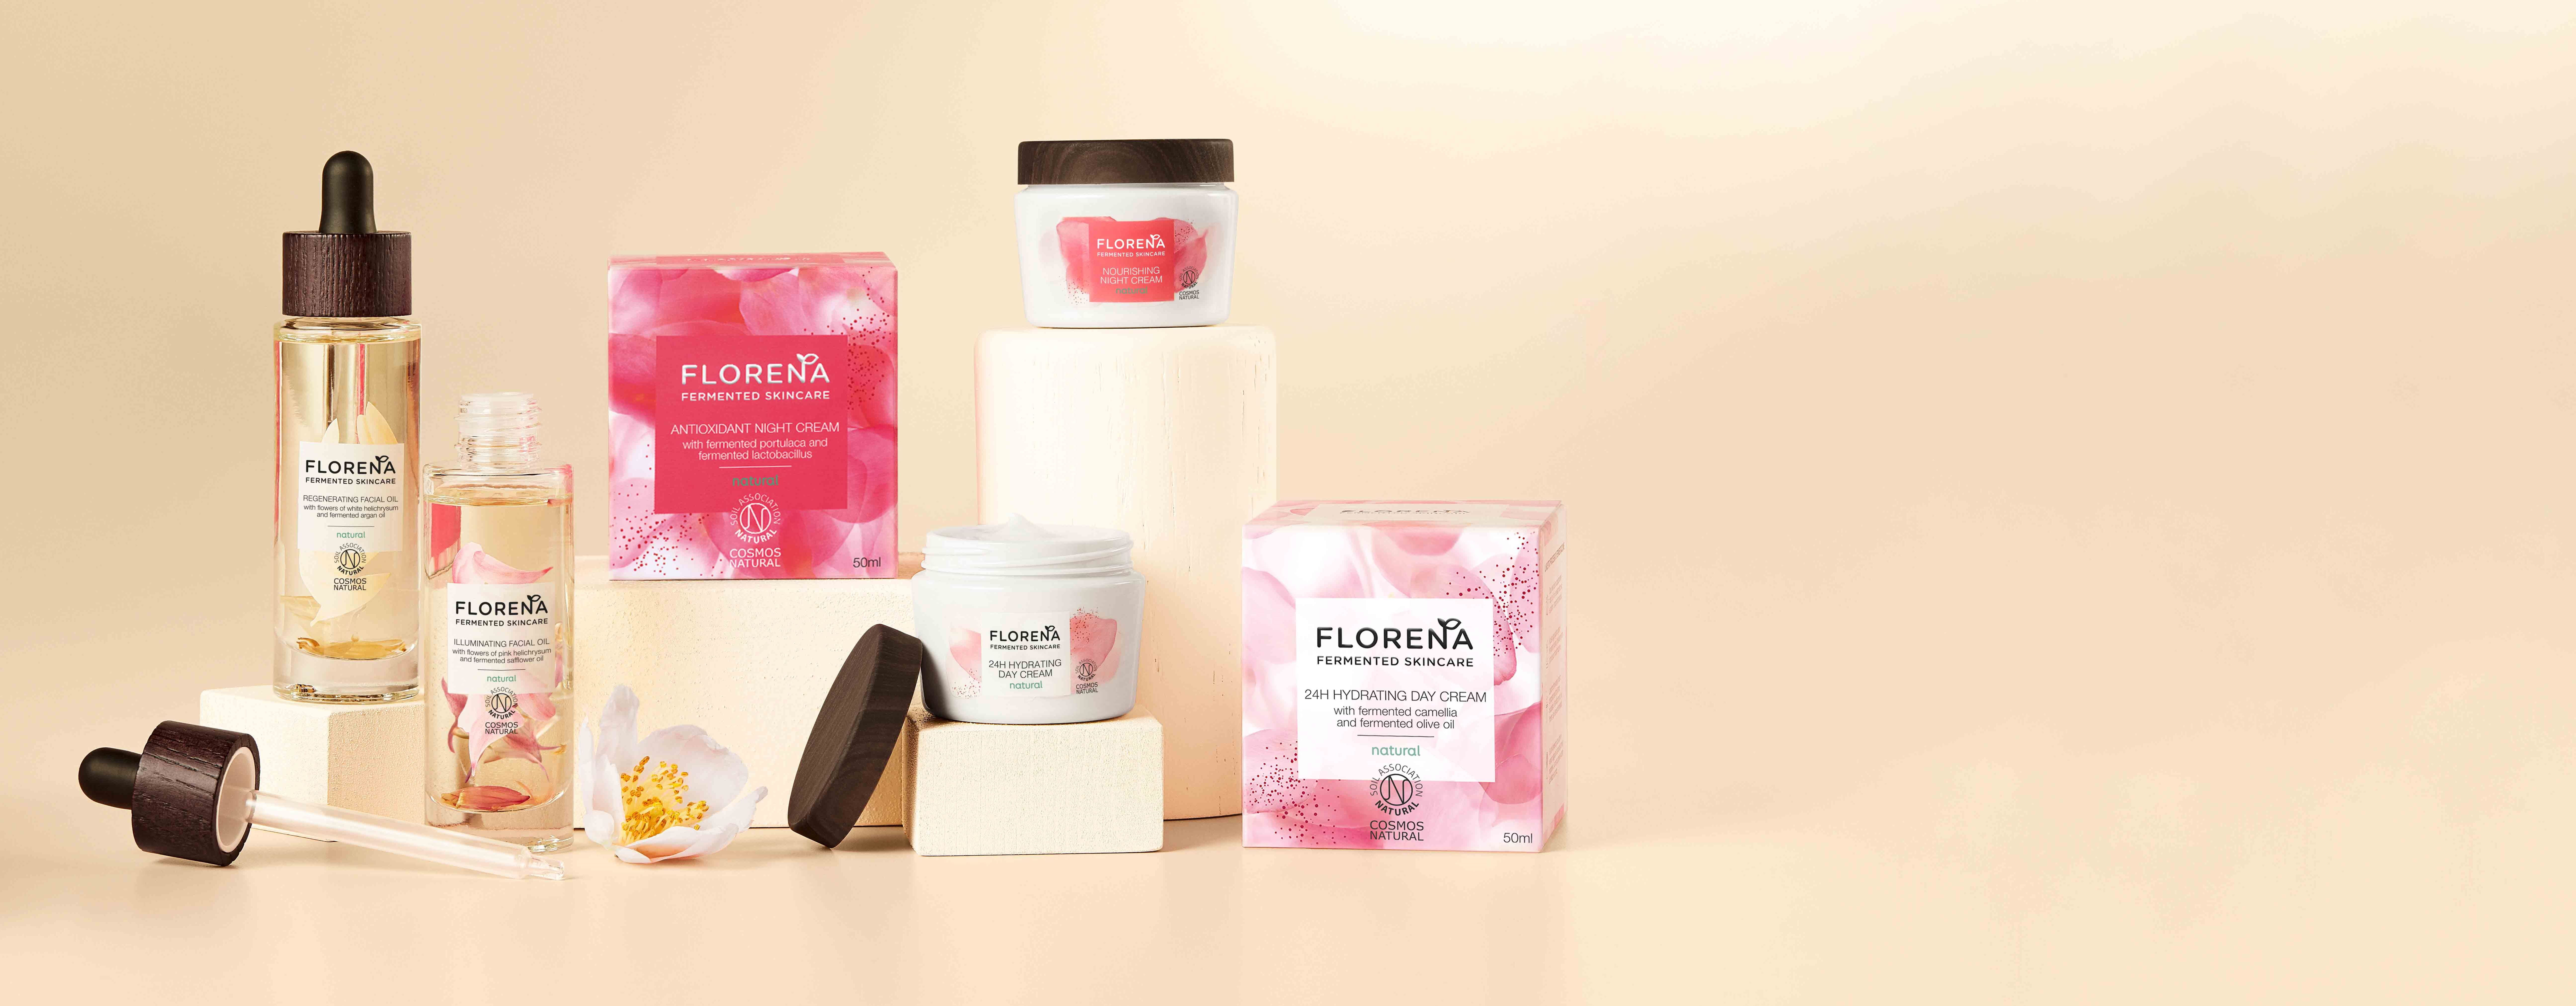 florena fermented skincare products